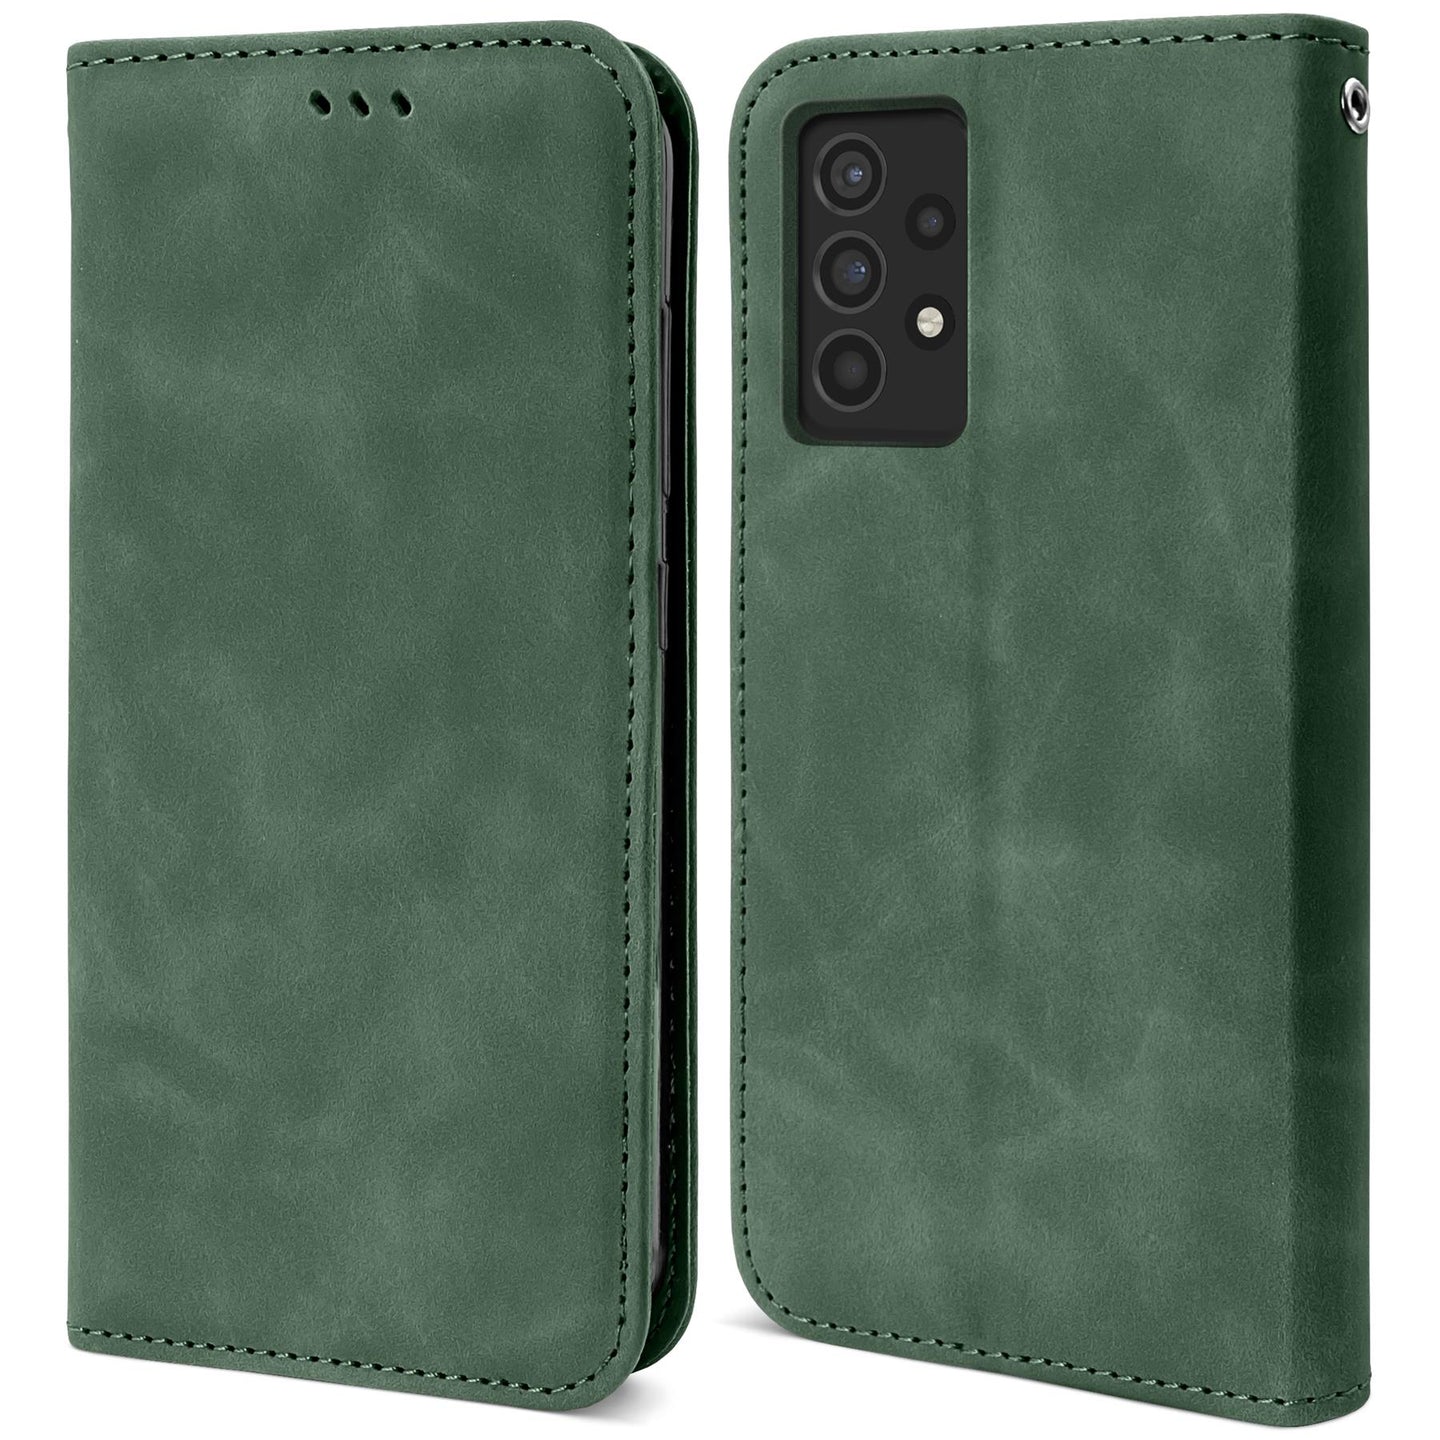 Moozy Marble Green Flip Case for Samsung A52s 5G and Samsung A52 - Flip Cover Magnetic Flip Folio Retro Wallet Case with Card Holder and Stand, Credit Card Slots, Kickstand Function